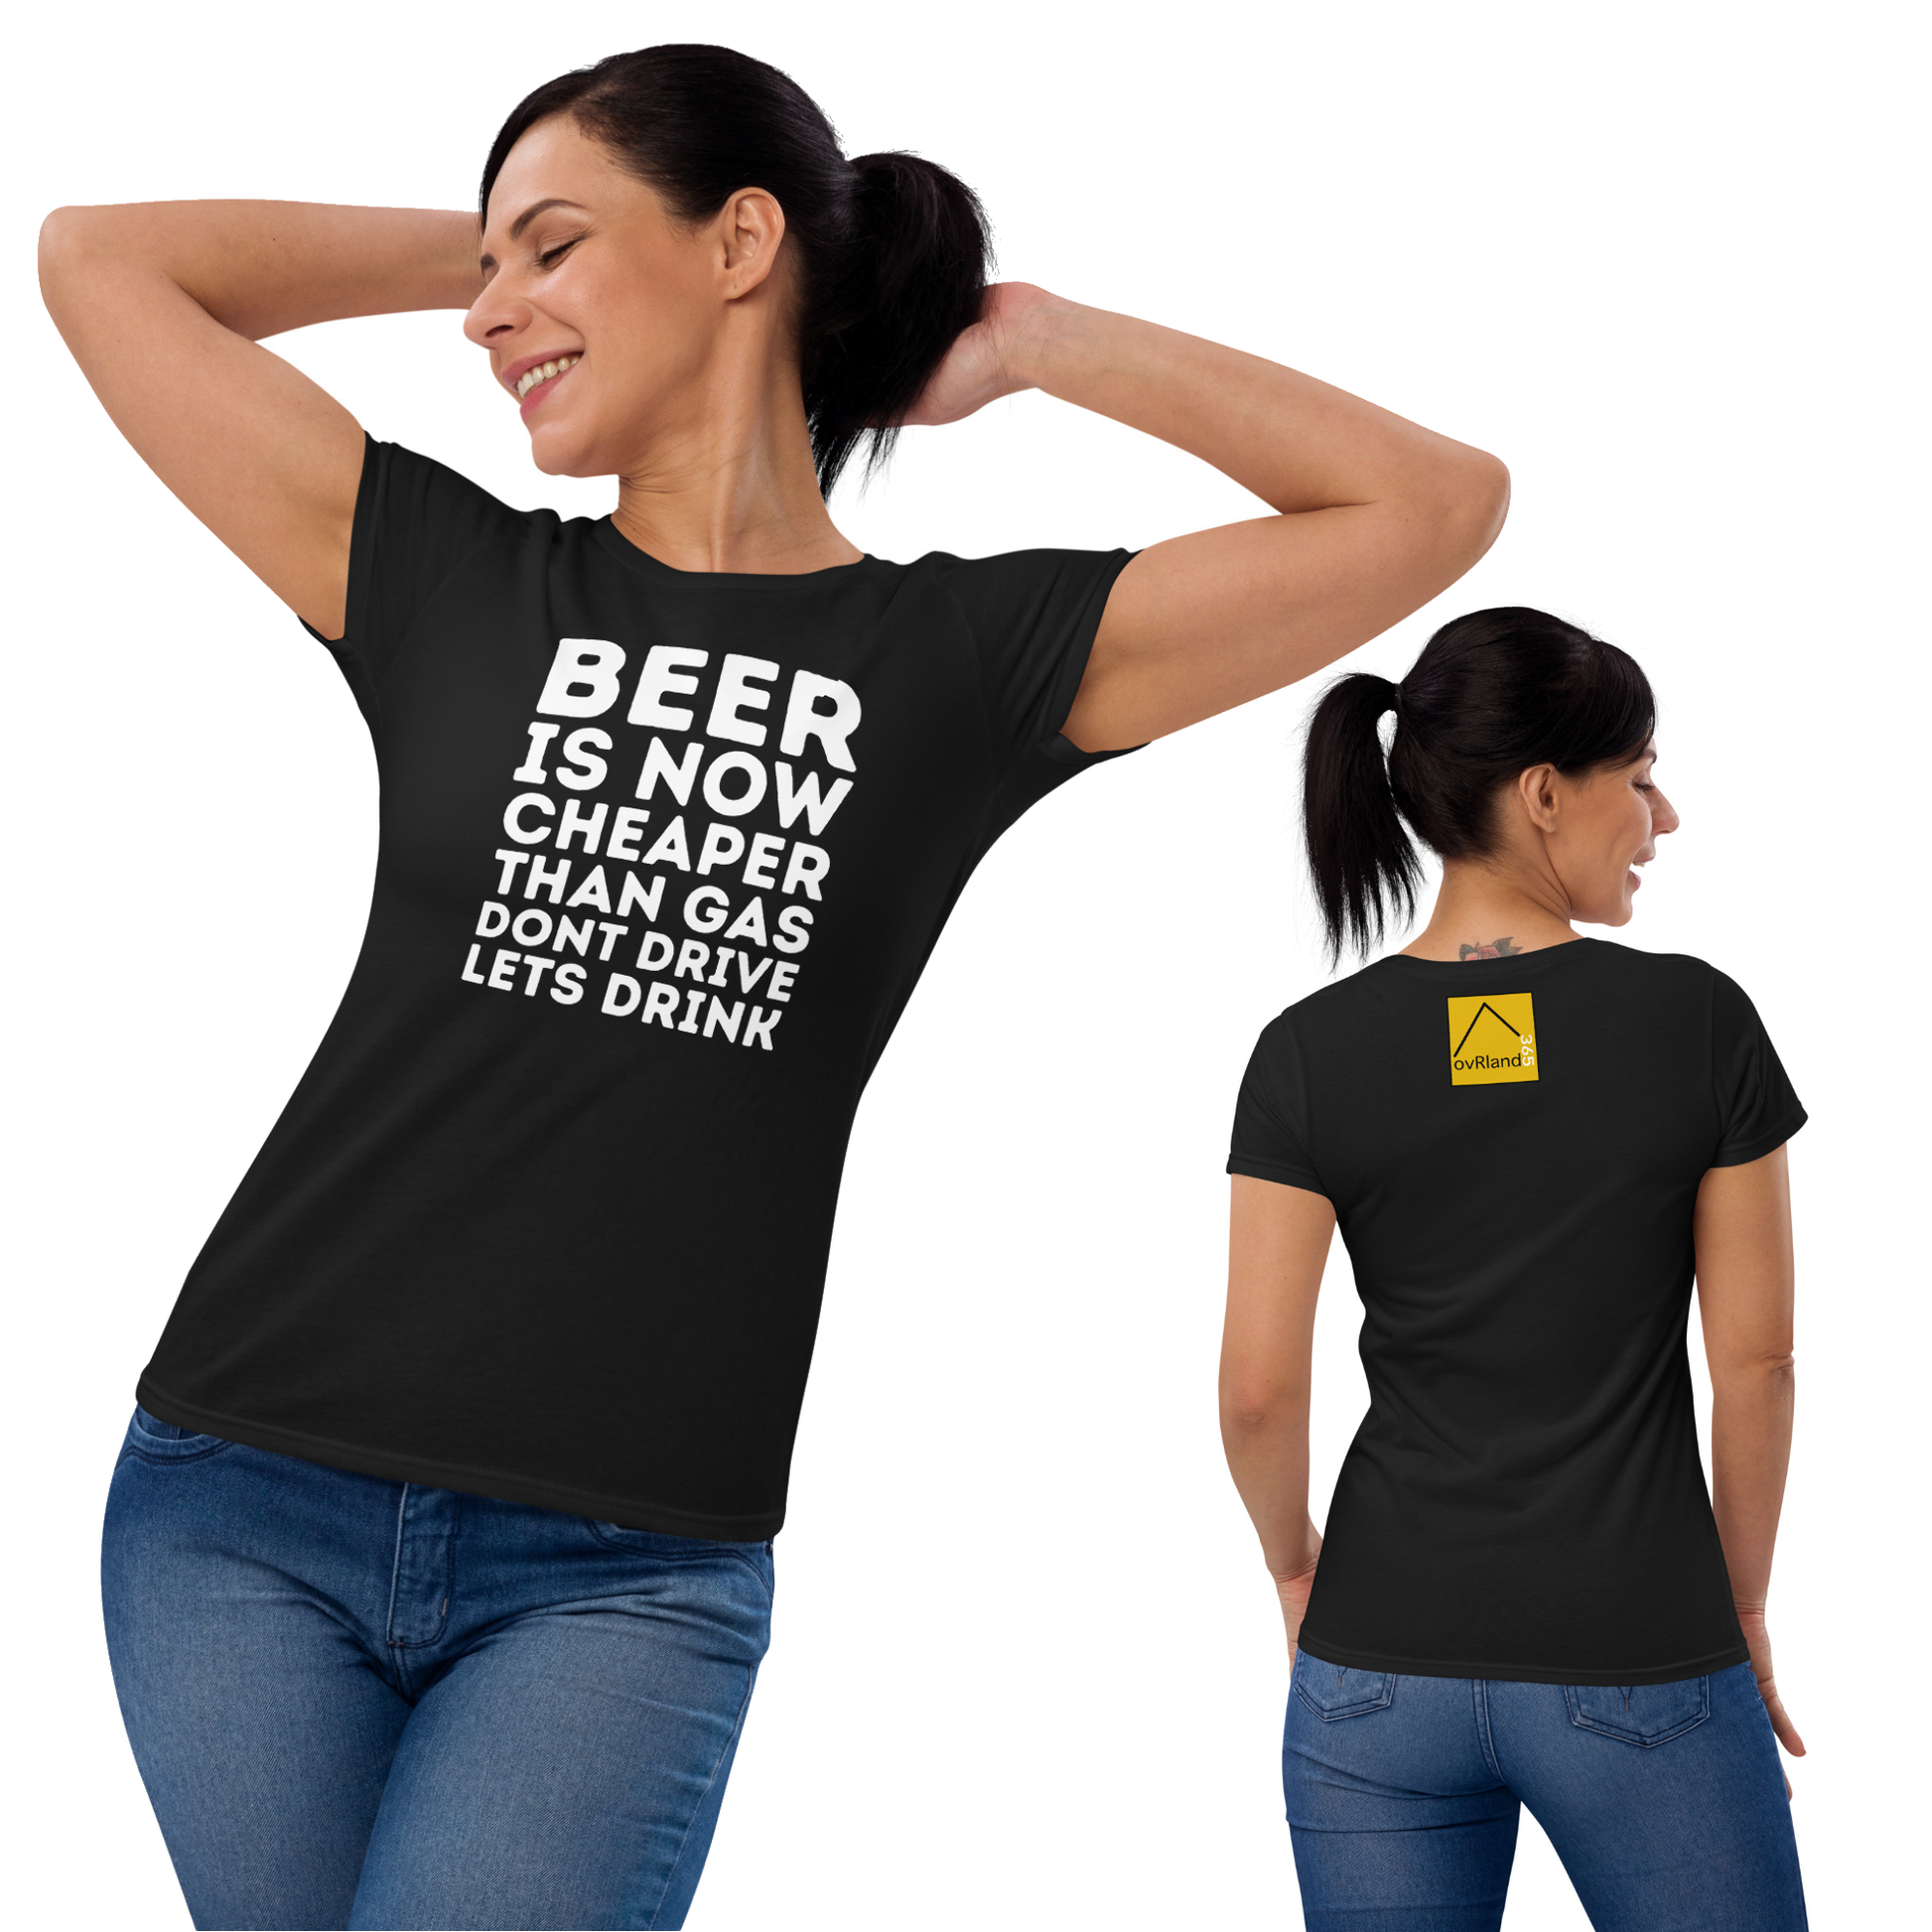 "BEER IS NOW CHEAPER THAN GAS. DONT DRIVE. LETS DRINK."  Black Women's t-shirt. overland365.com